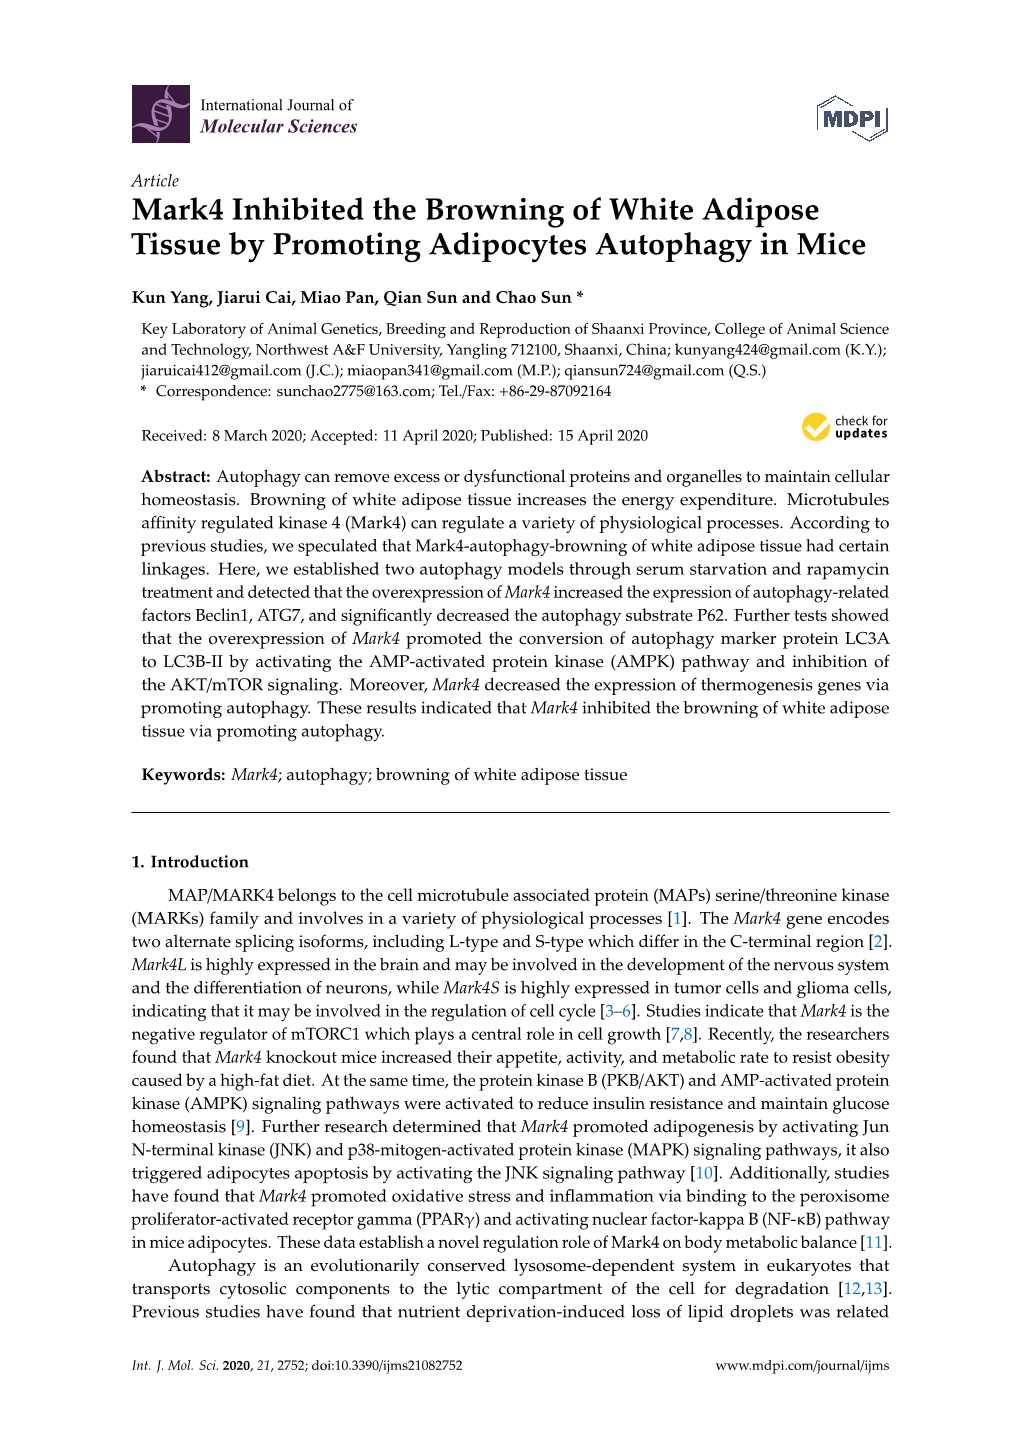 Mark4 Inhibited the Browning of White Adipose Tissue by Promoting Adipocytes Autophagy in Mice